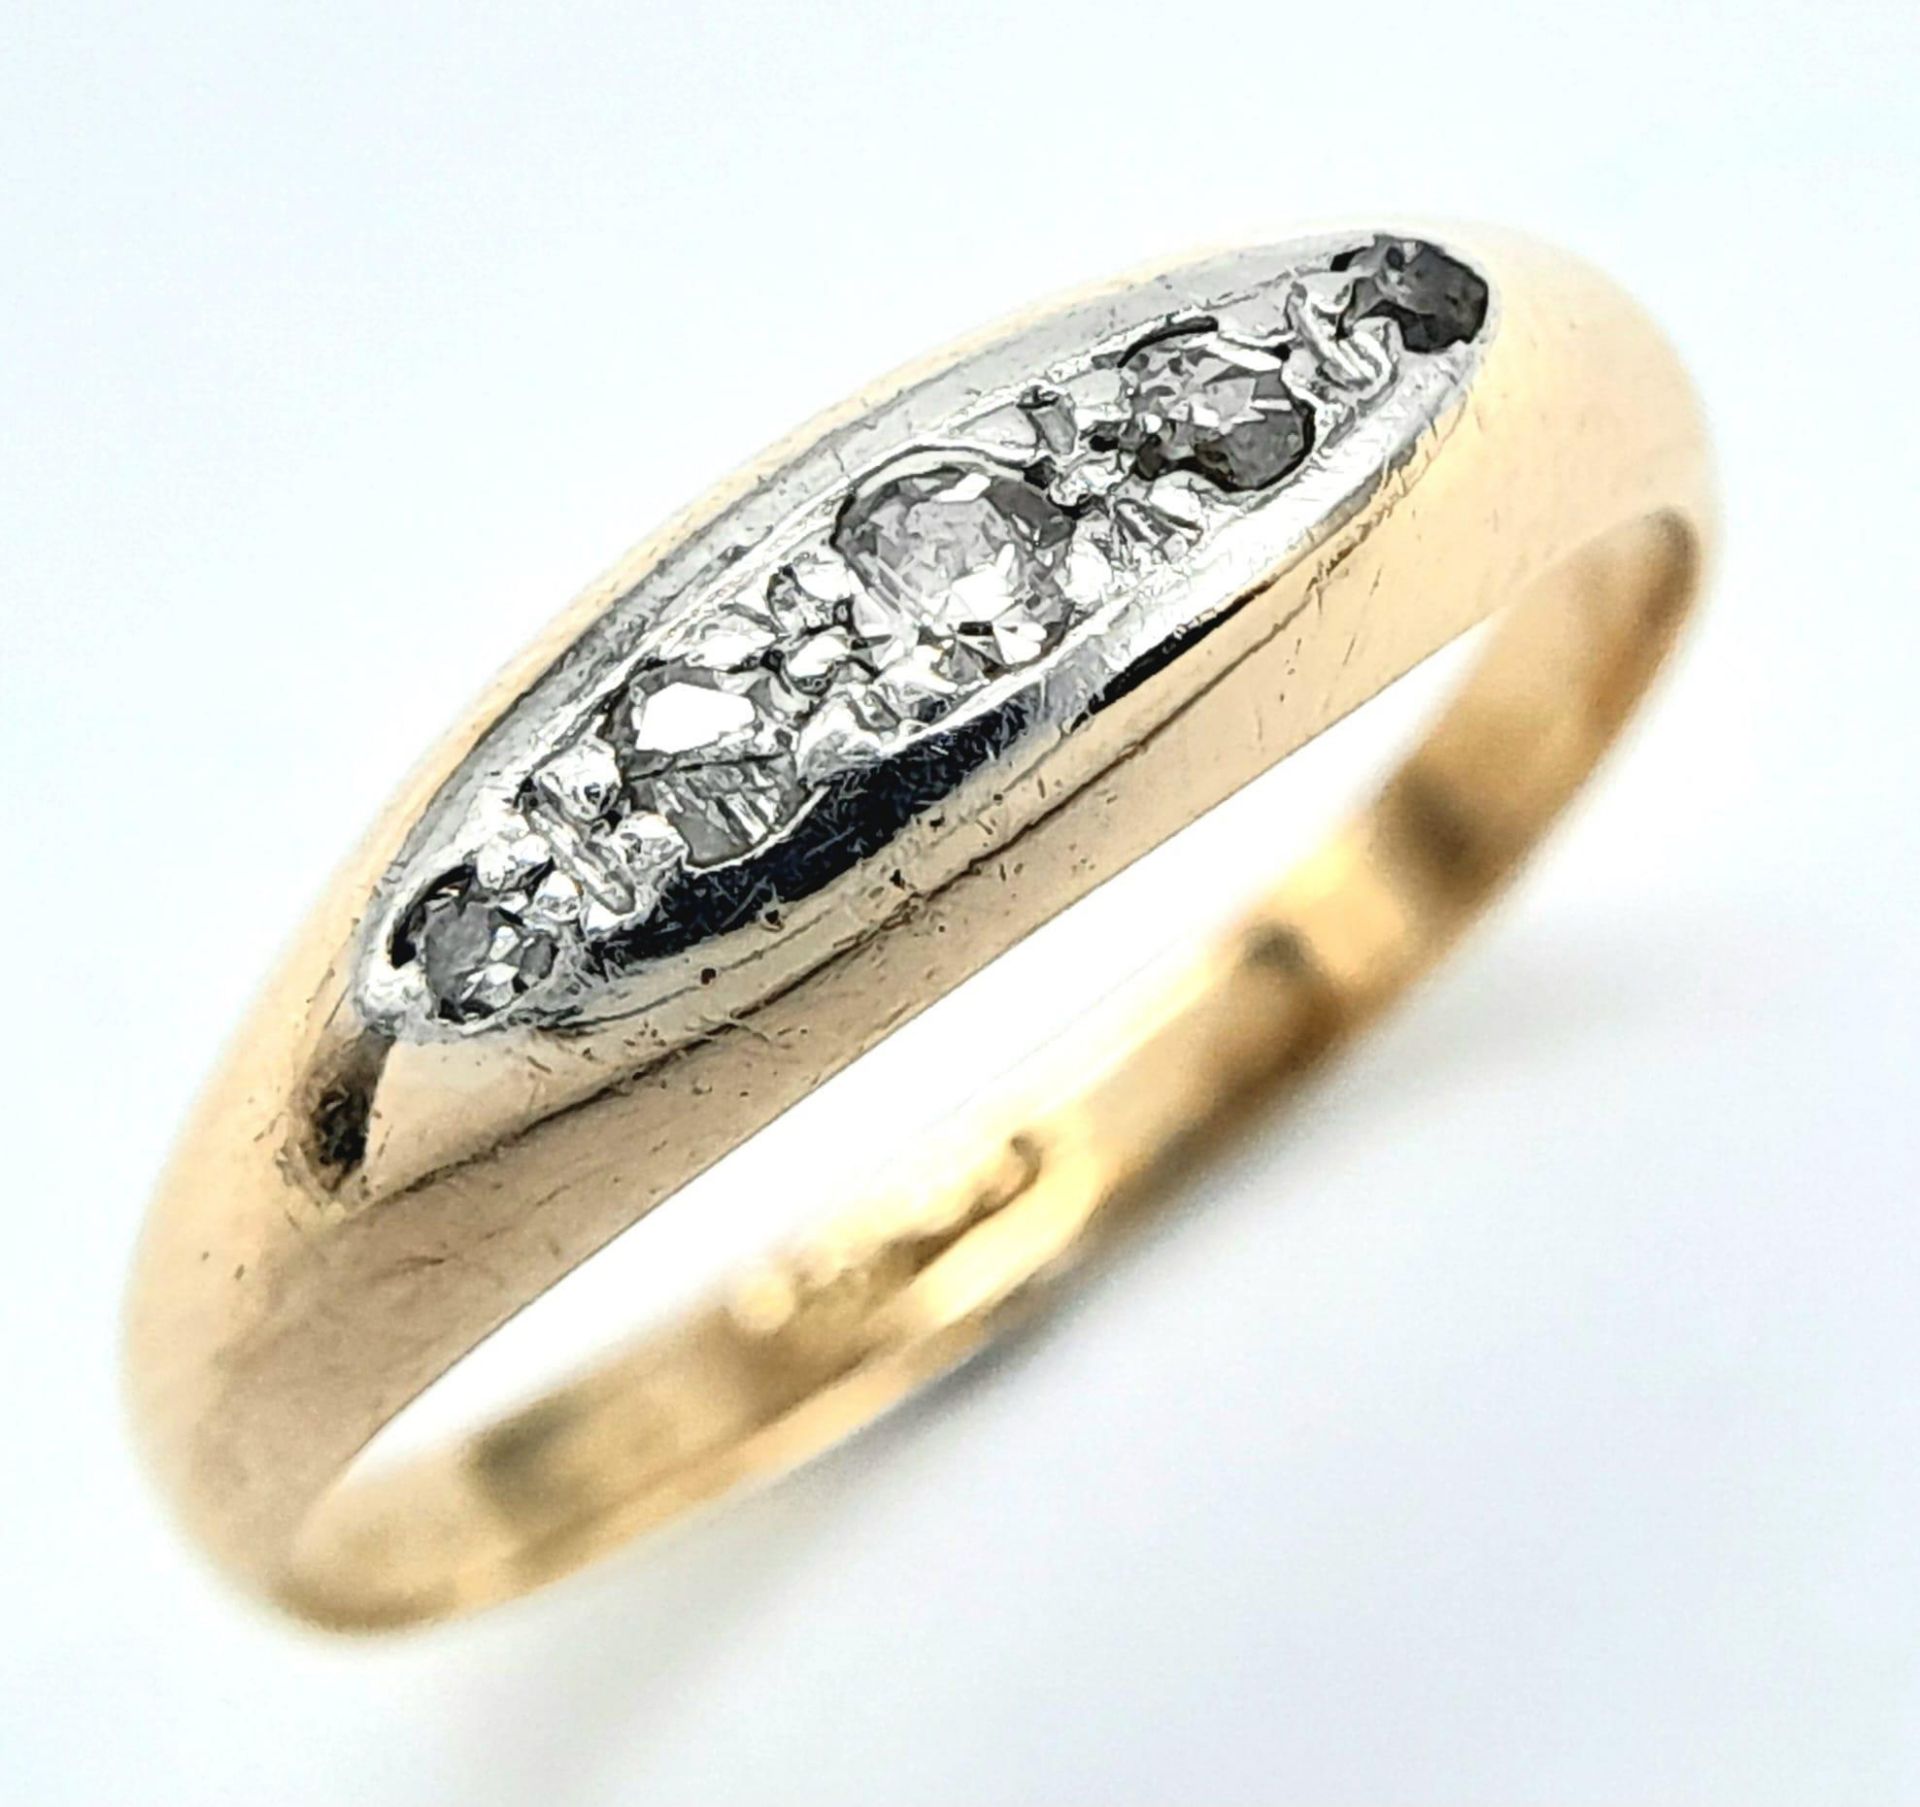 An 18K Yellow Gold and Platinum Vintage Diamond Ring. Size G, 1.5 total weight. Ref: 8452 - Image 2 of 9